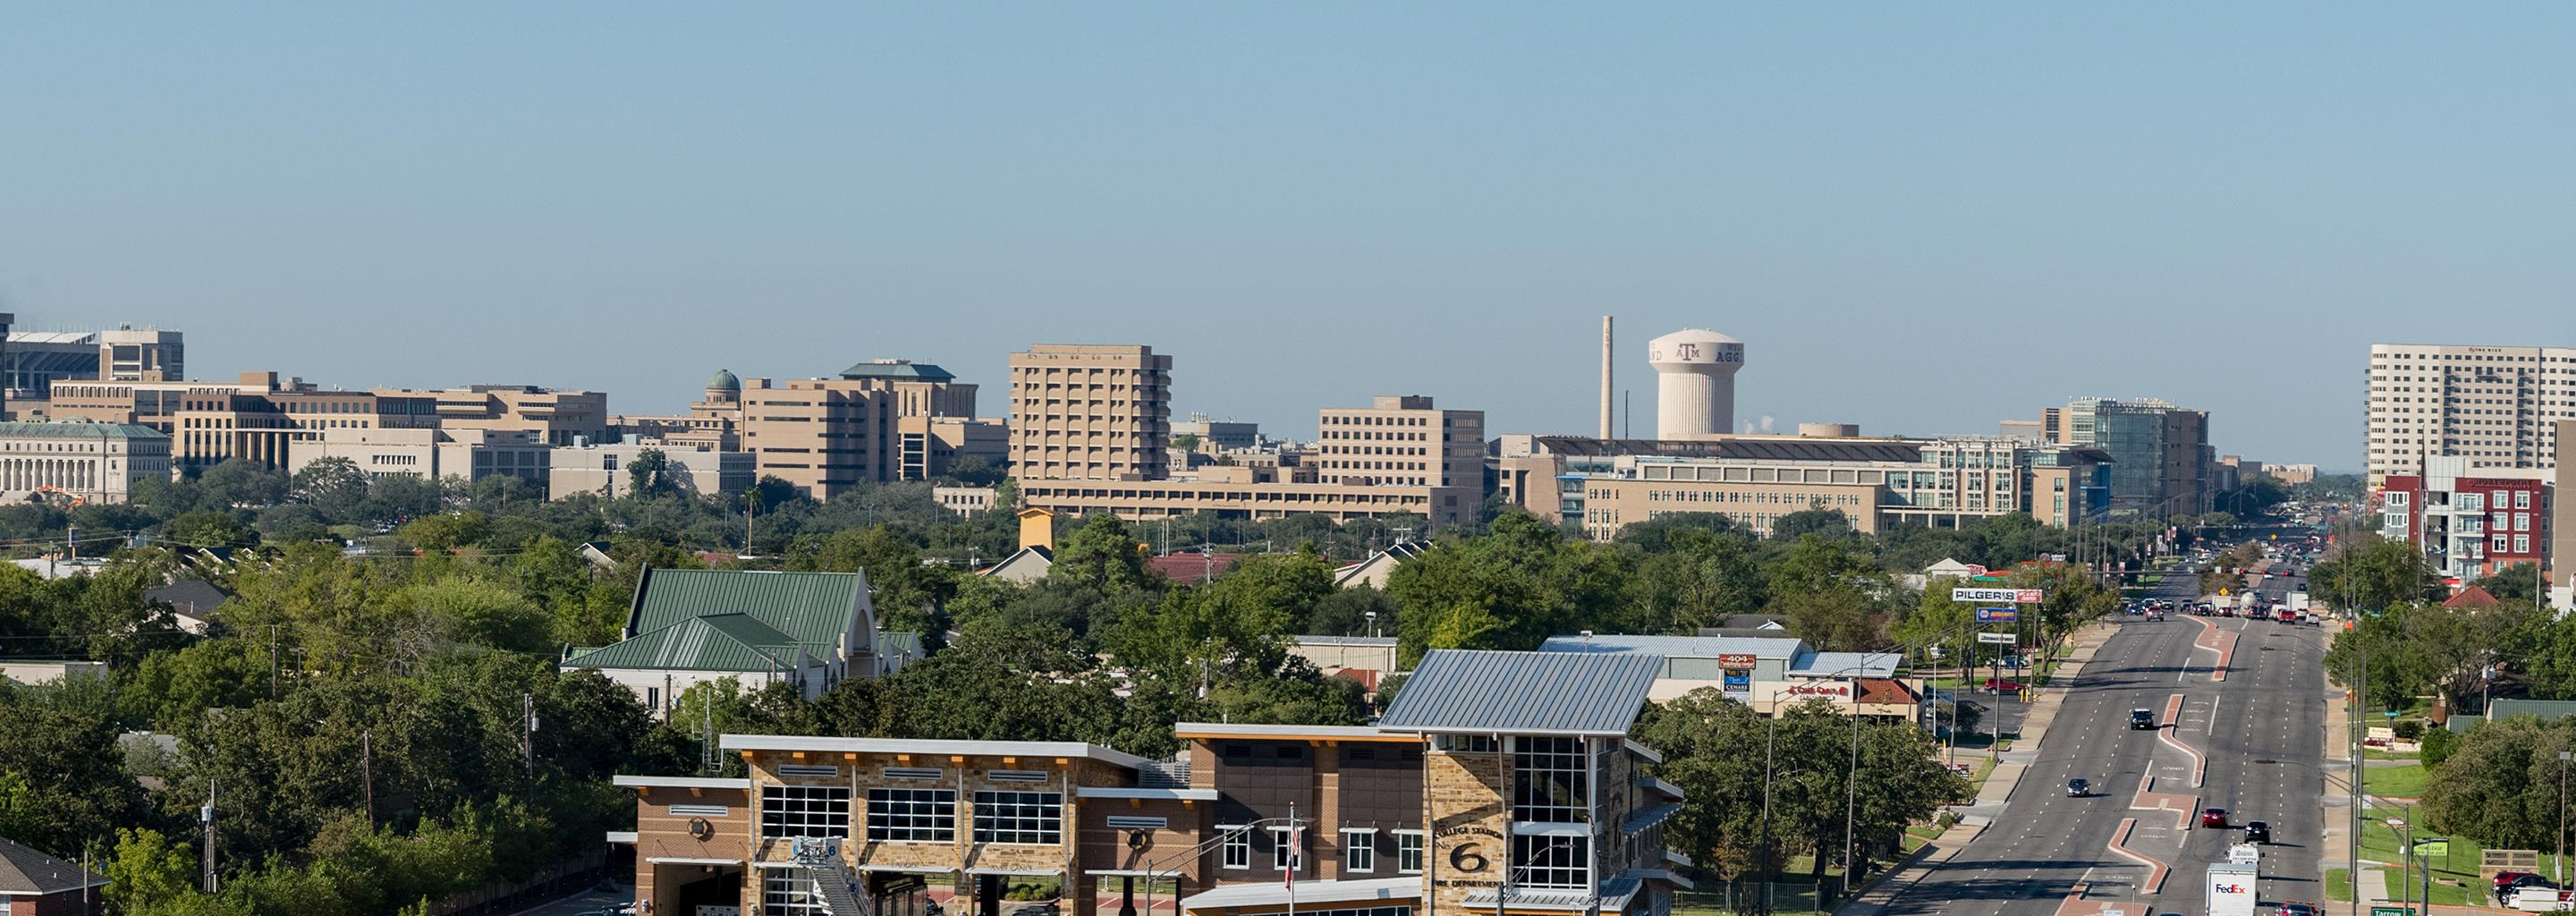 Aerial View of Downtown College Station